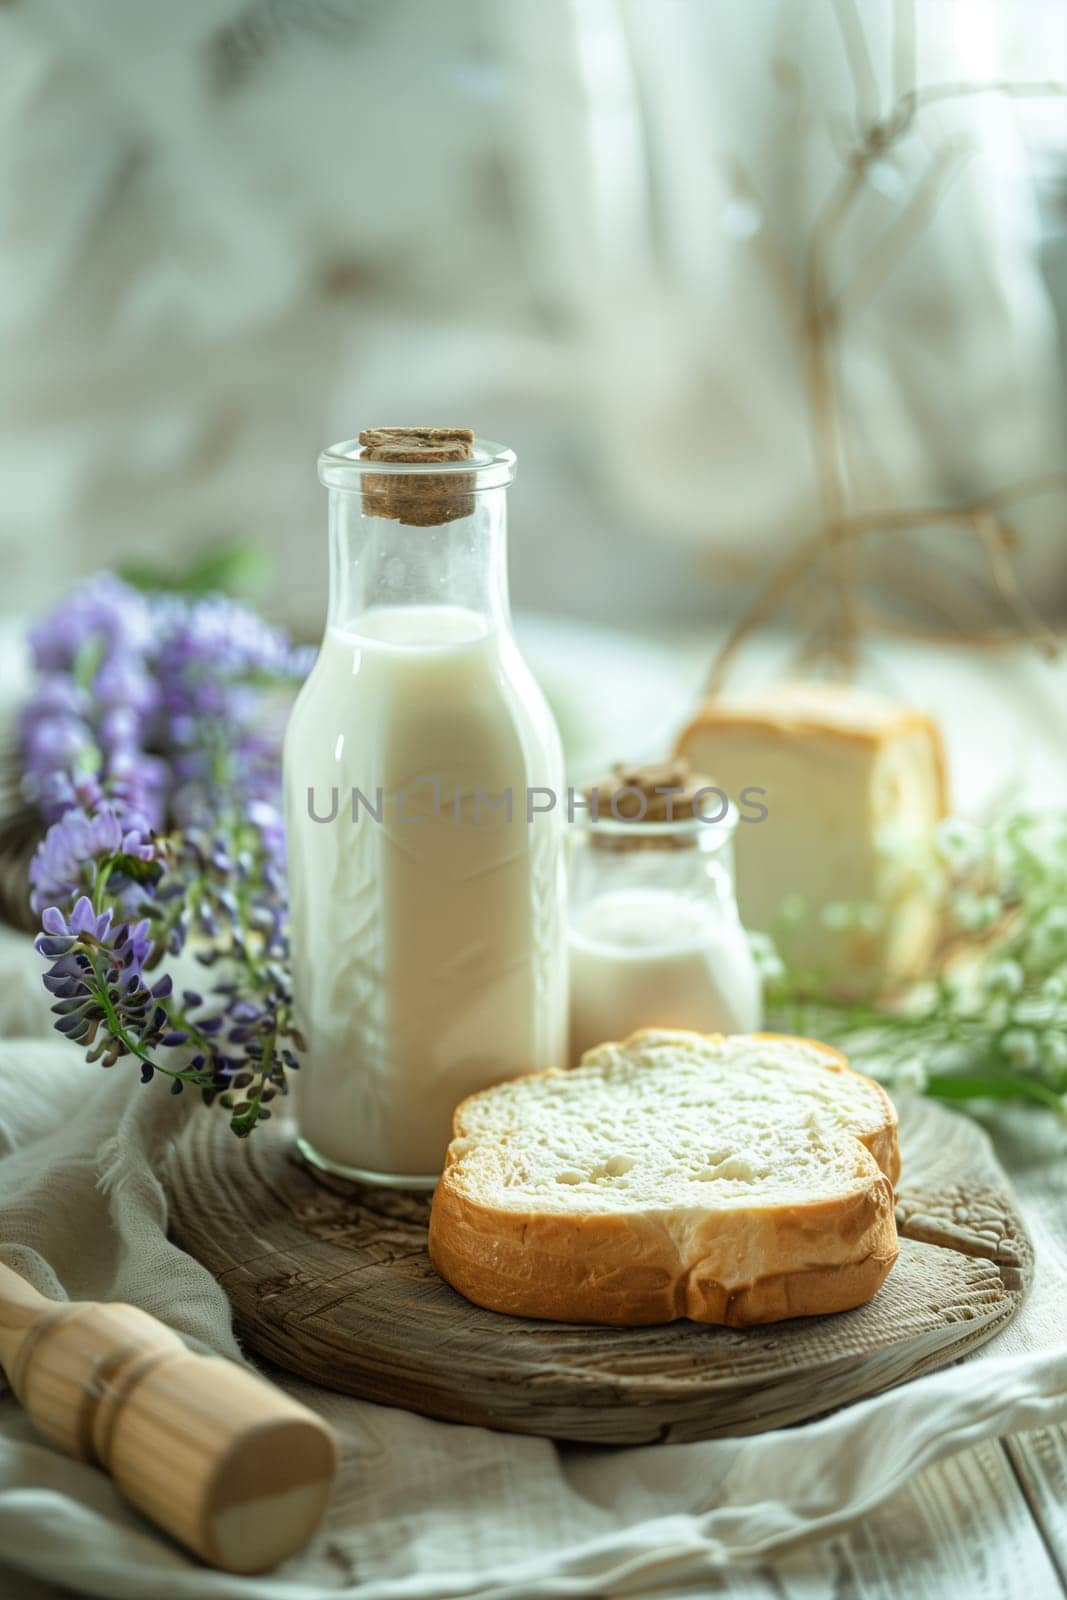 A table displaying bread and milk as part of a Shavuot celebration.